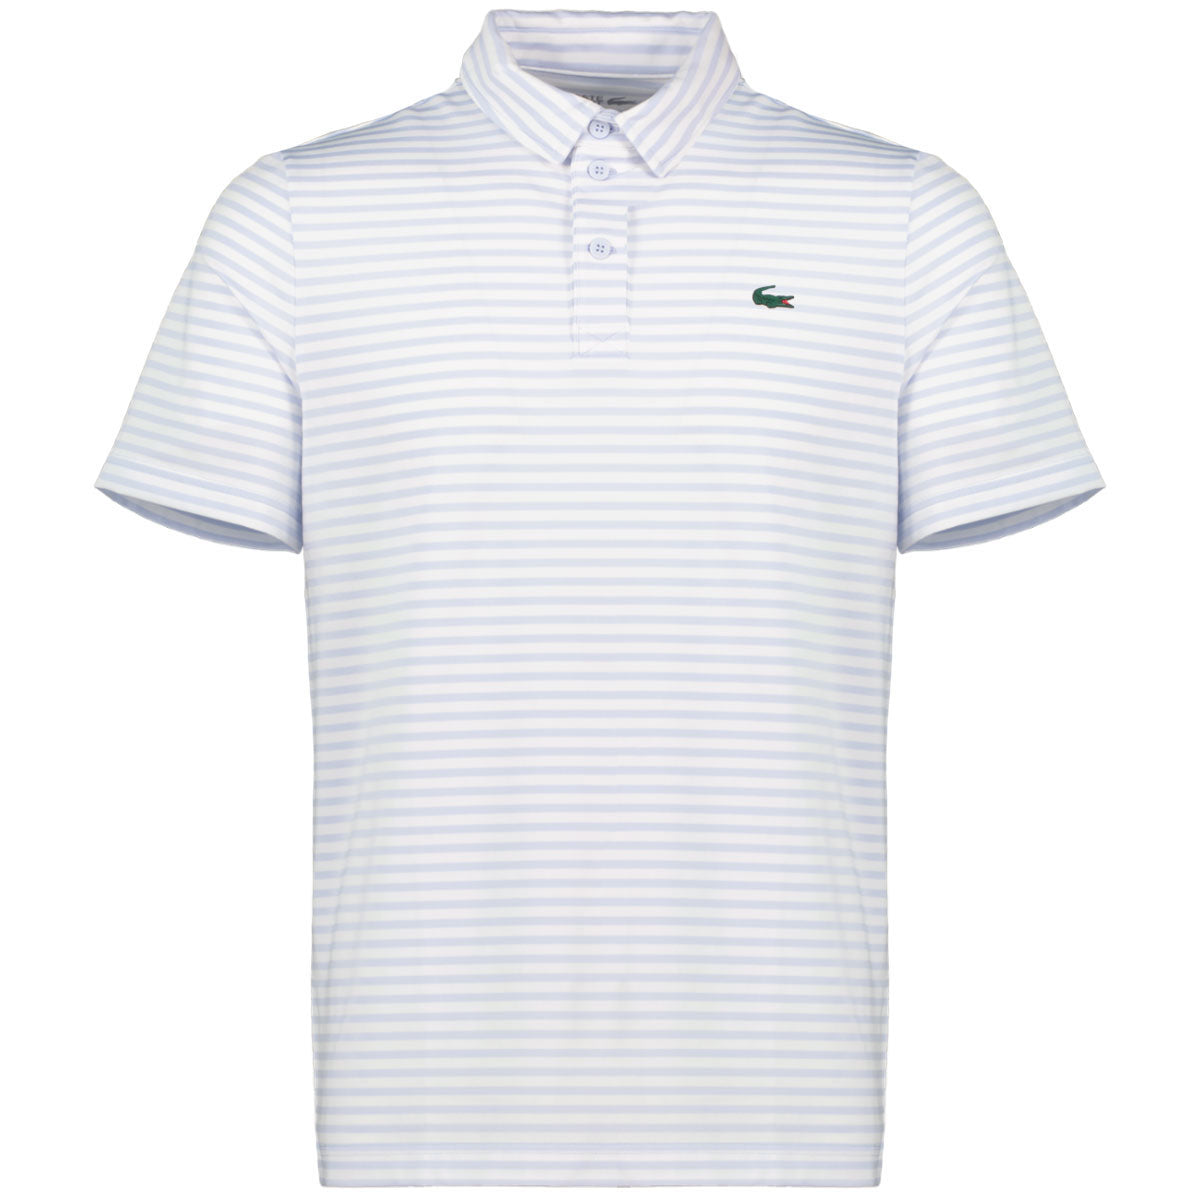 Lacoste All Over Stripe Golf Polo Shirt DH7418